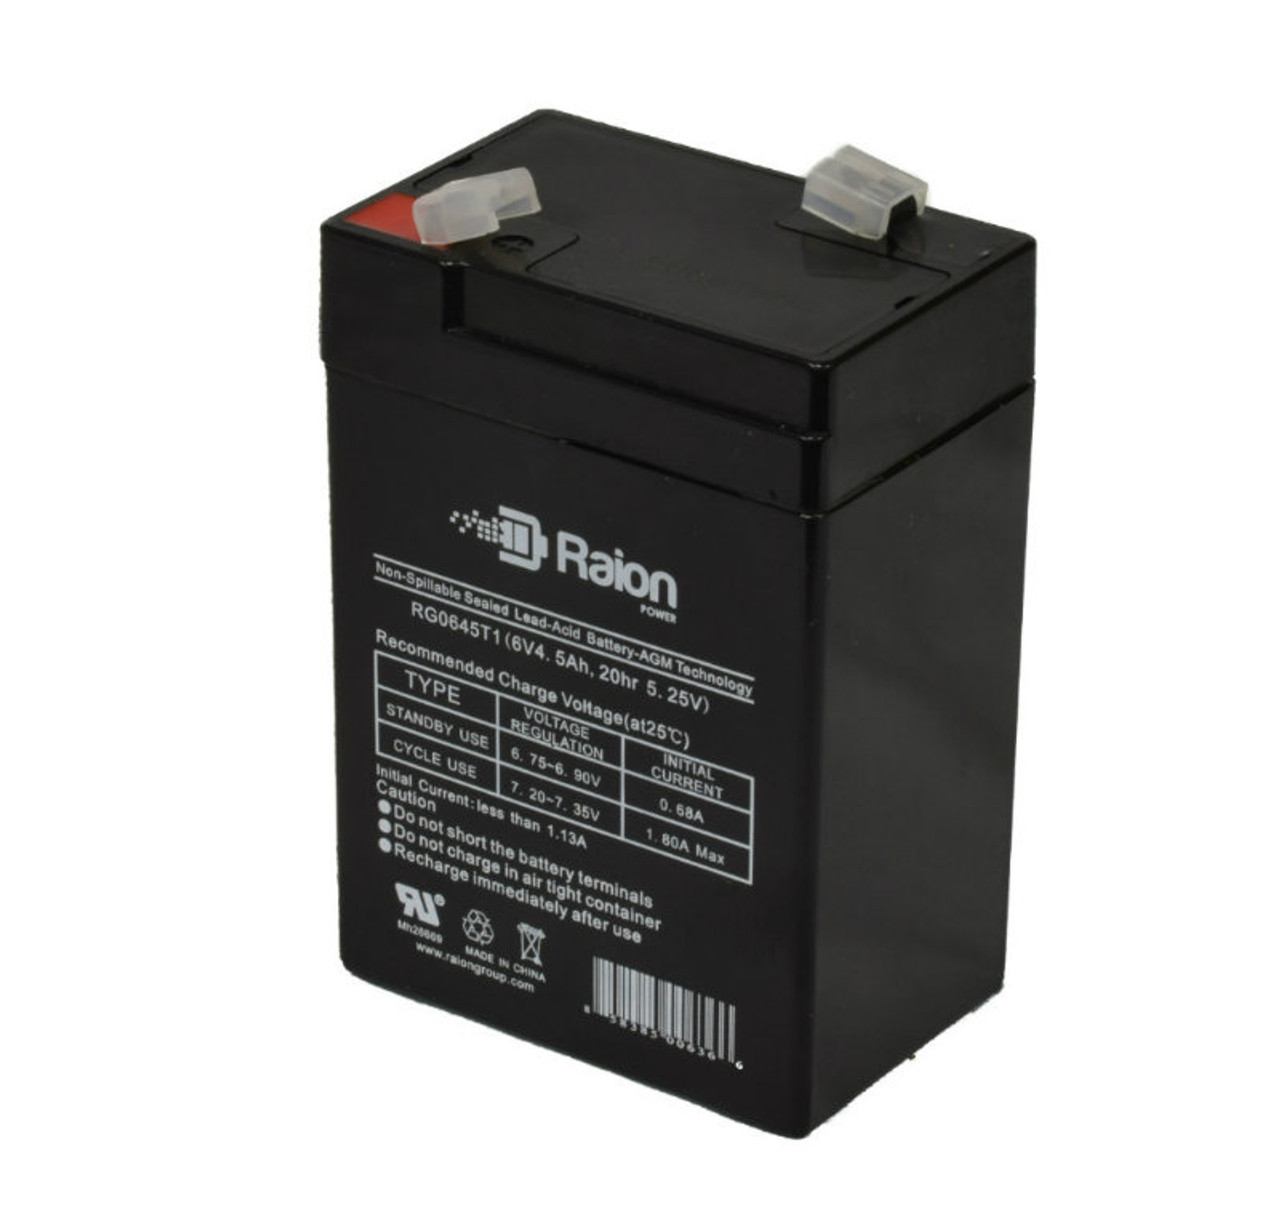 Raion Power RG0645T1 6V 4.5Ah Replacement Battery Cartridge for SeaWill SW660S